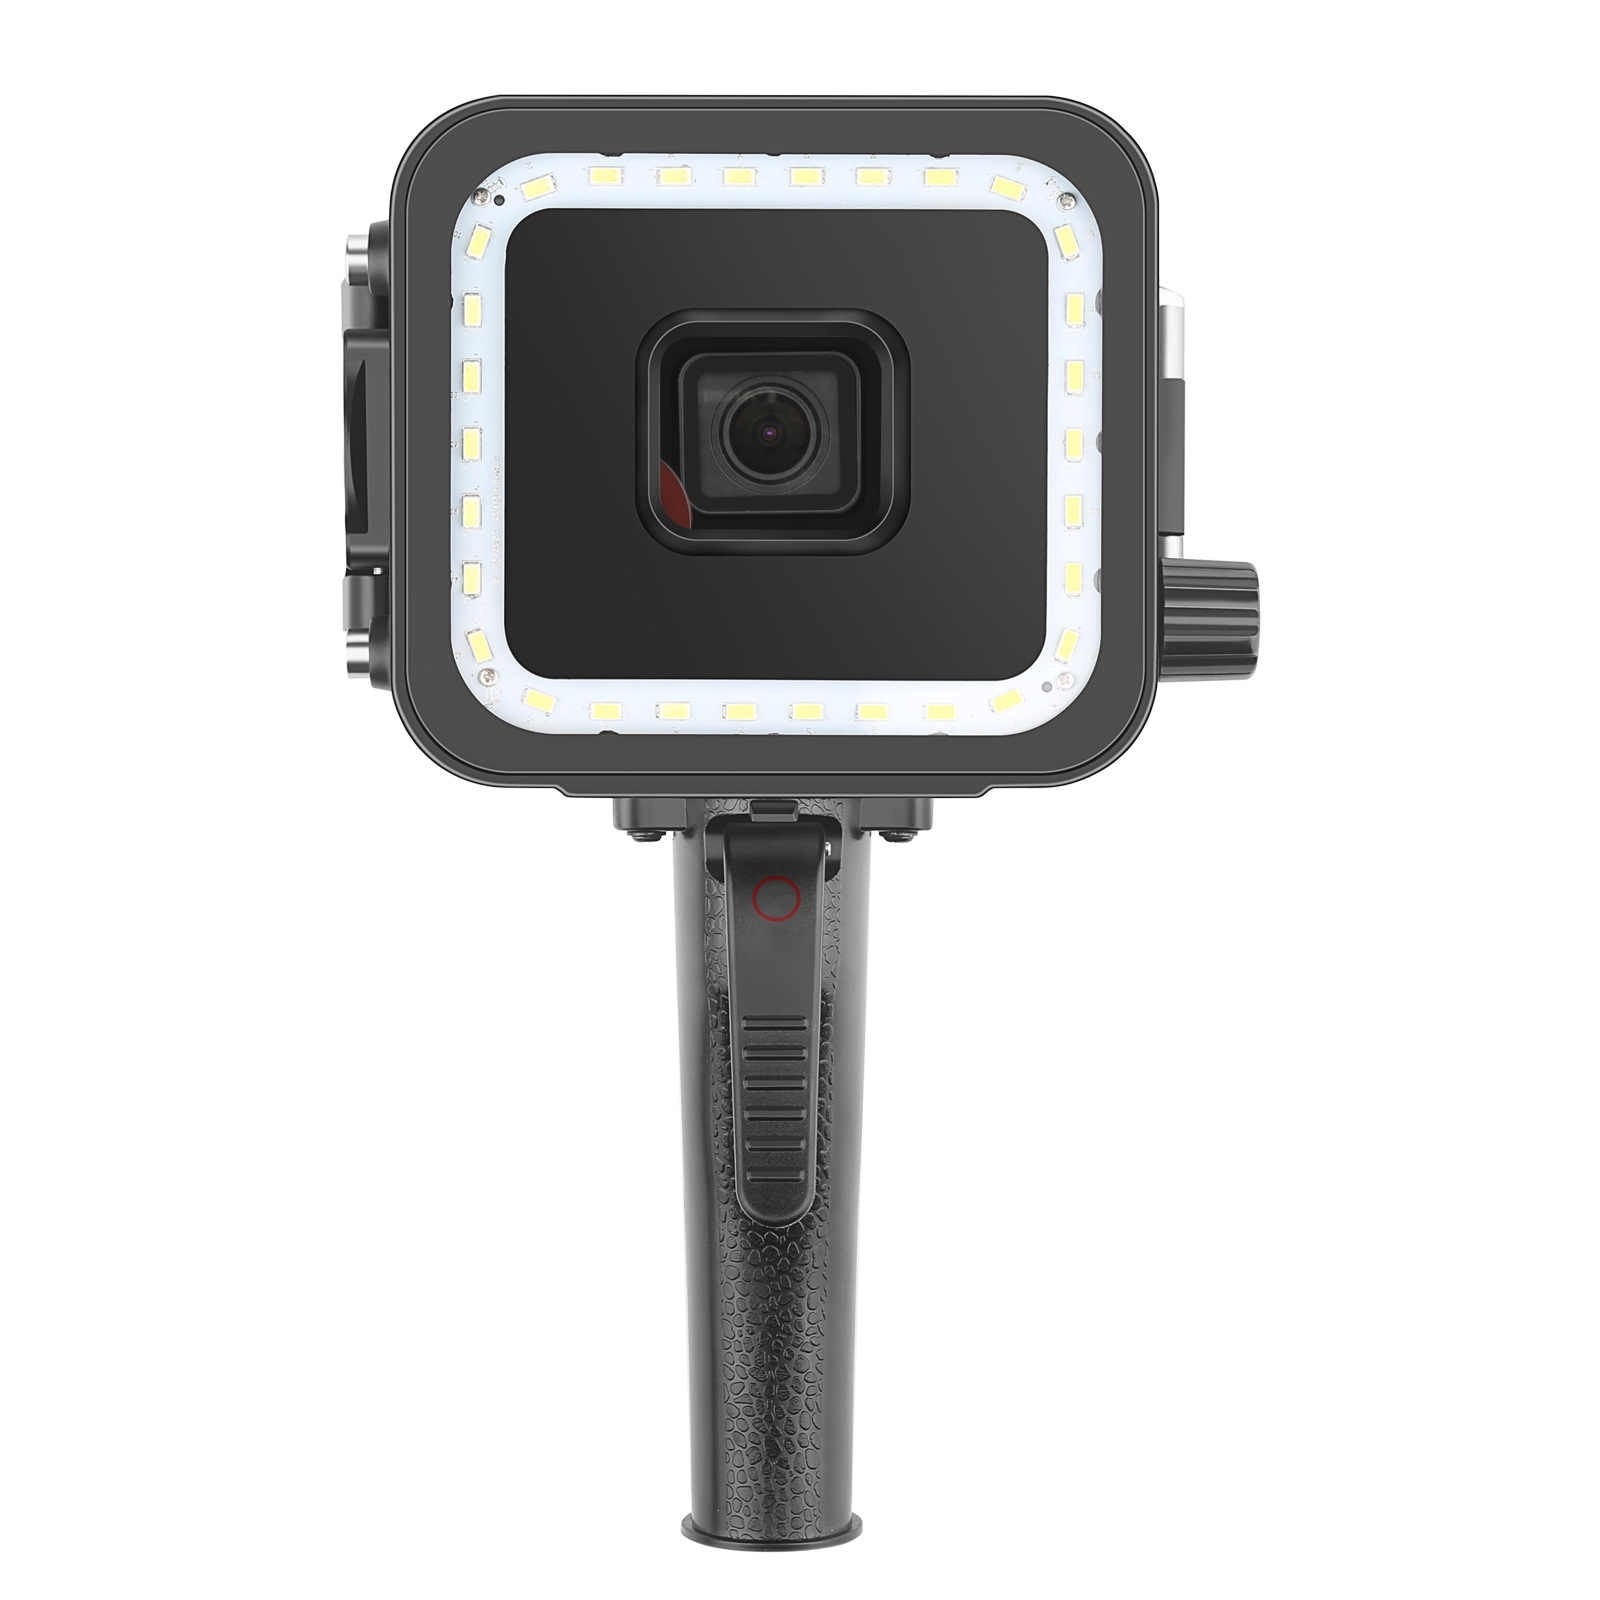 acceptable Absence meaning Carcasa Subacvatica Cu Lampa LED Pentru GoPro Hero 5, 6, 7 Black - eMAG.ro